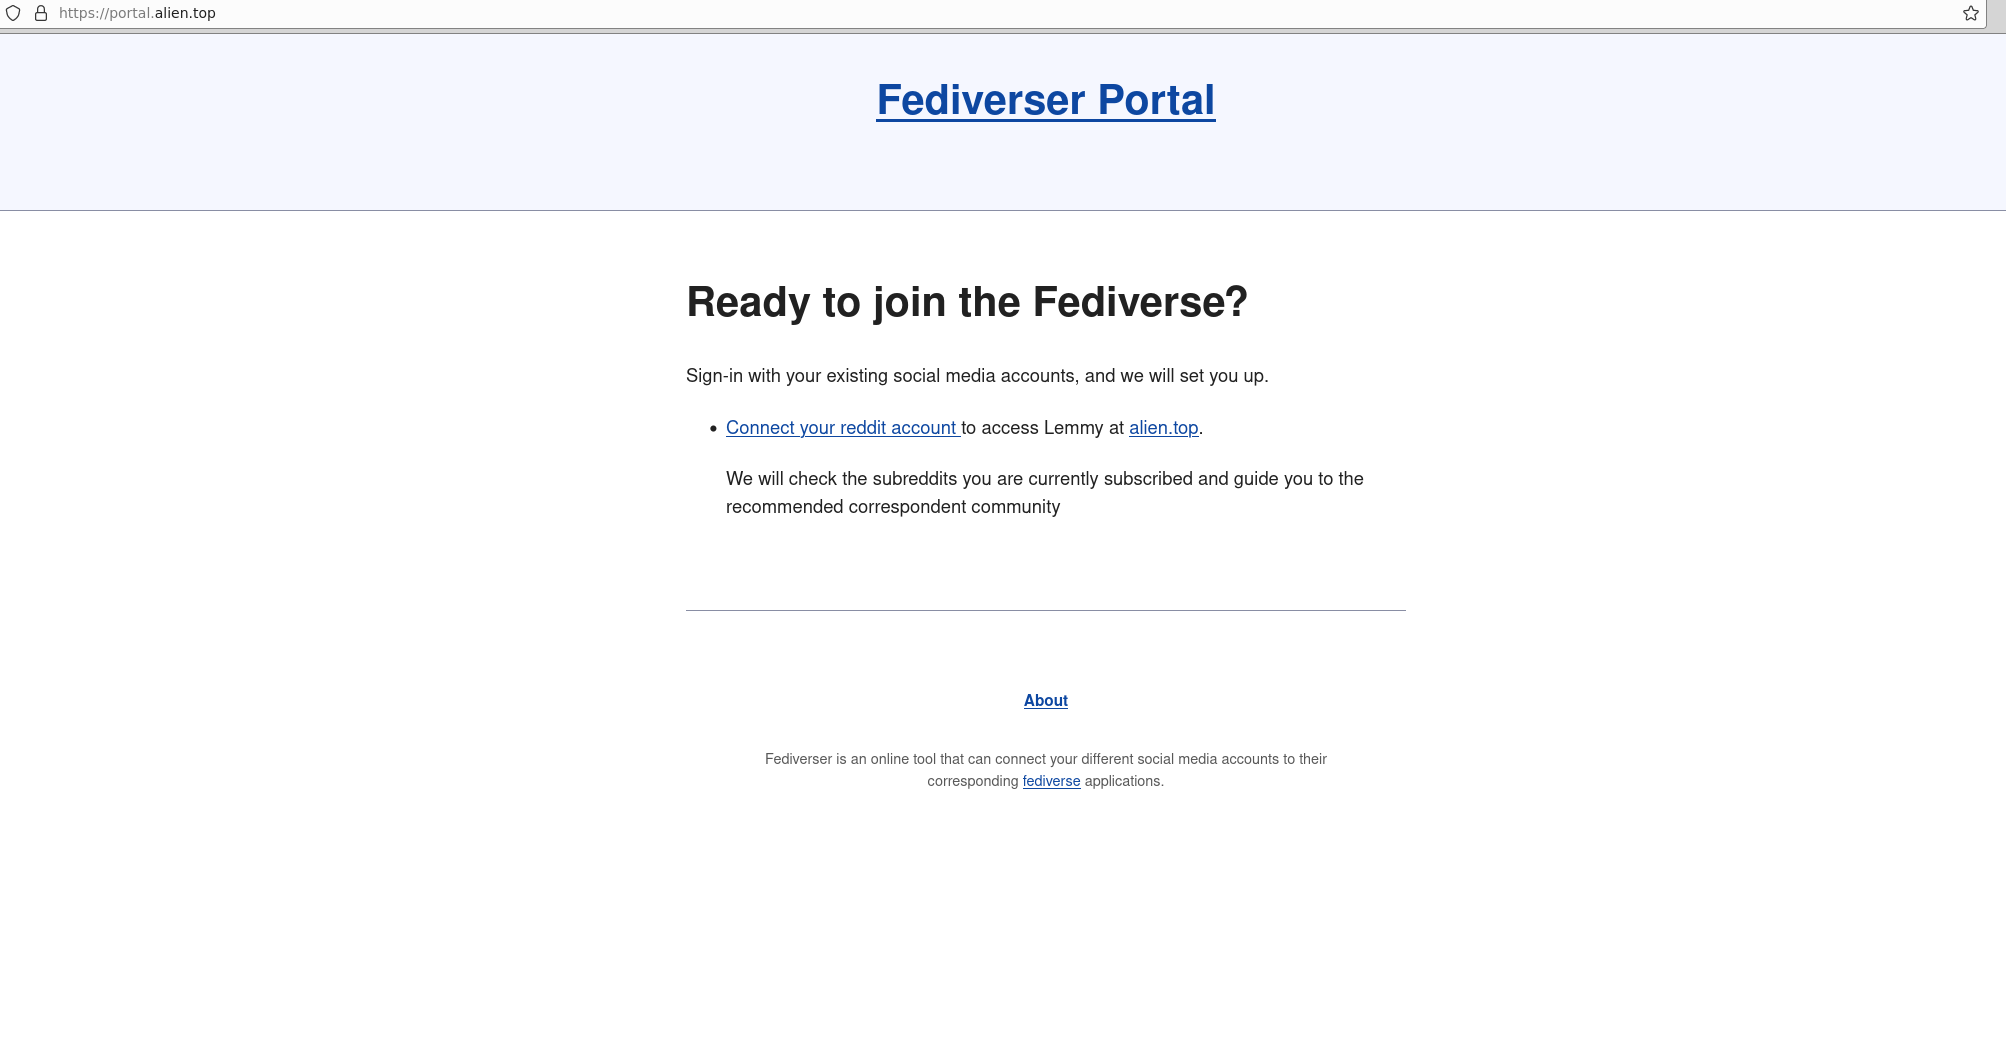 This is the portal page